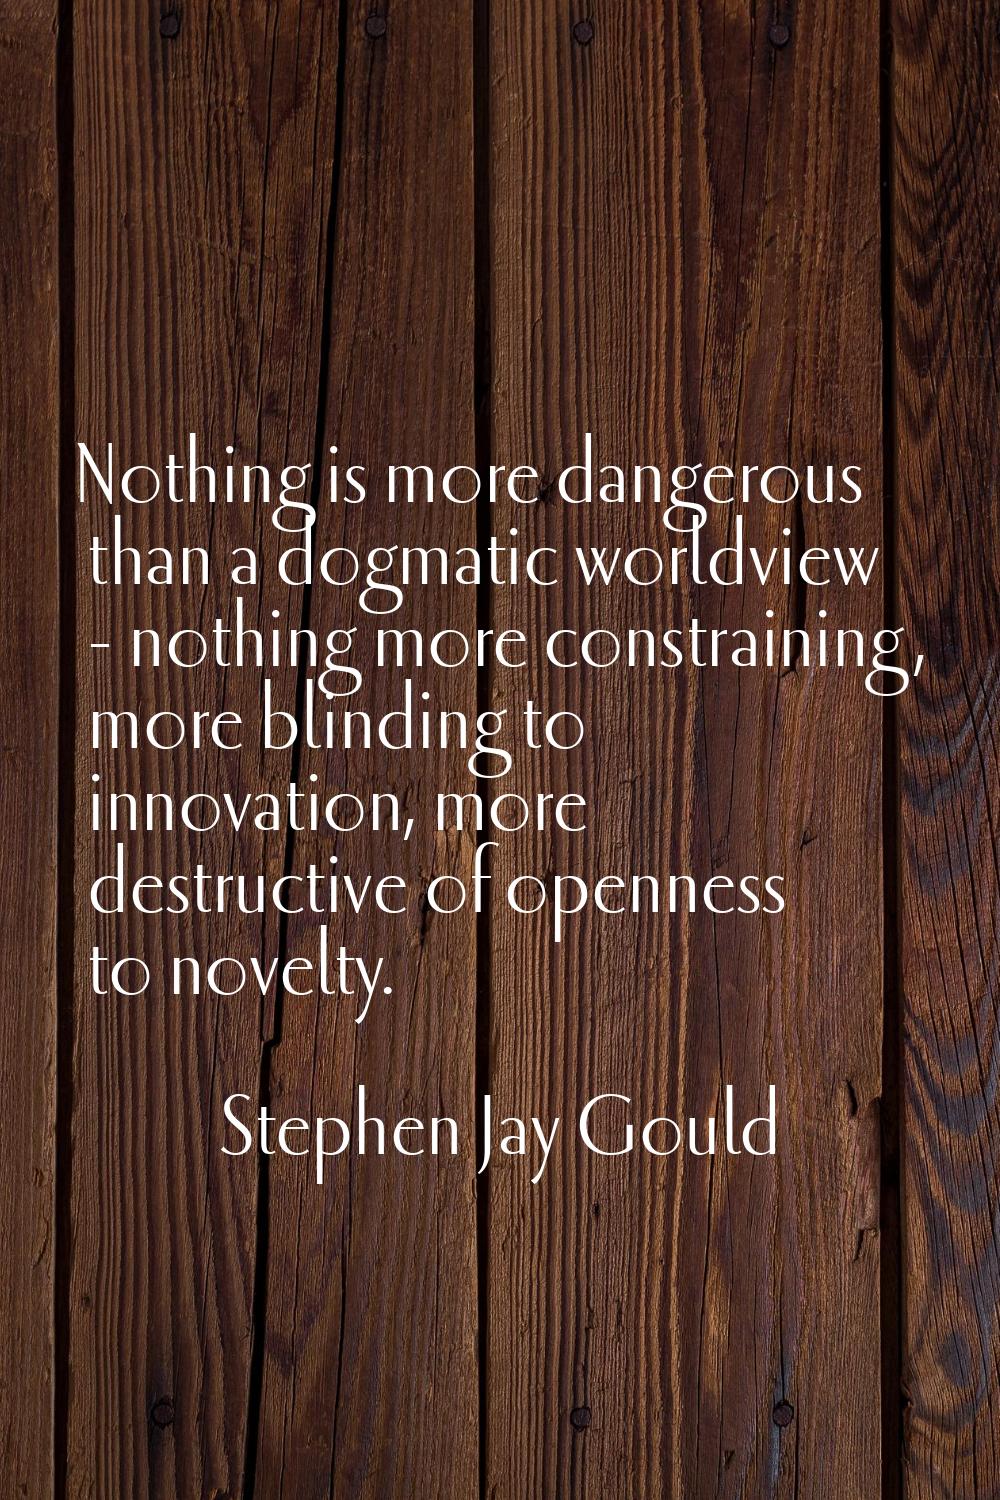 Nothing is more dangerous than a dogmatic worldview - nothing more constraining, more blinding to i